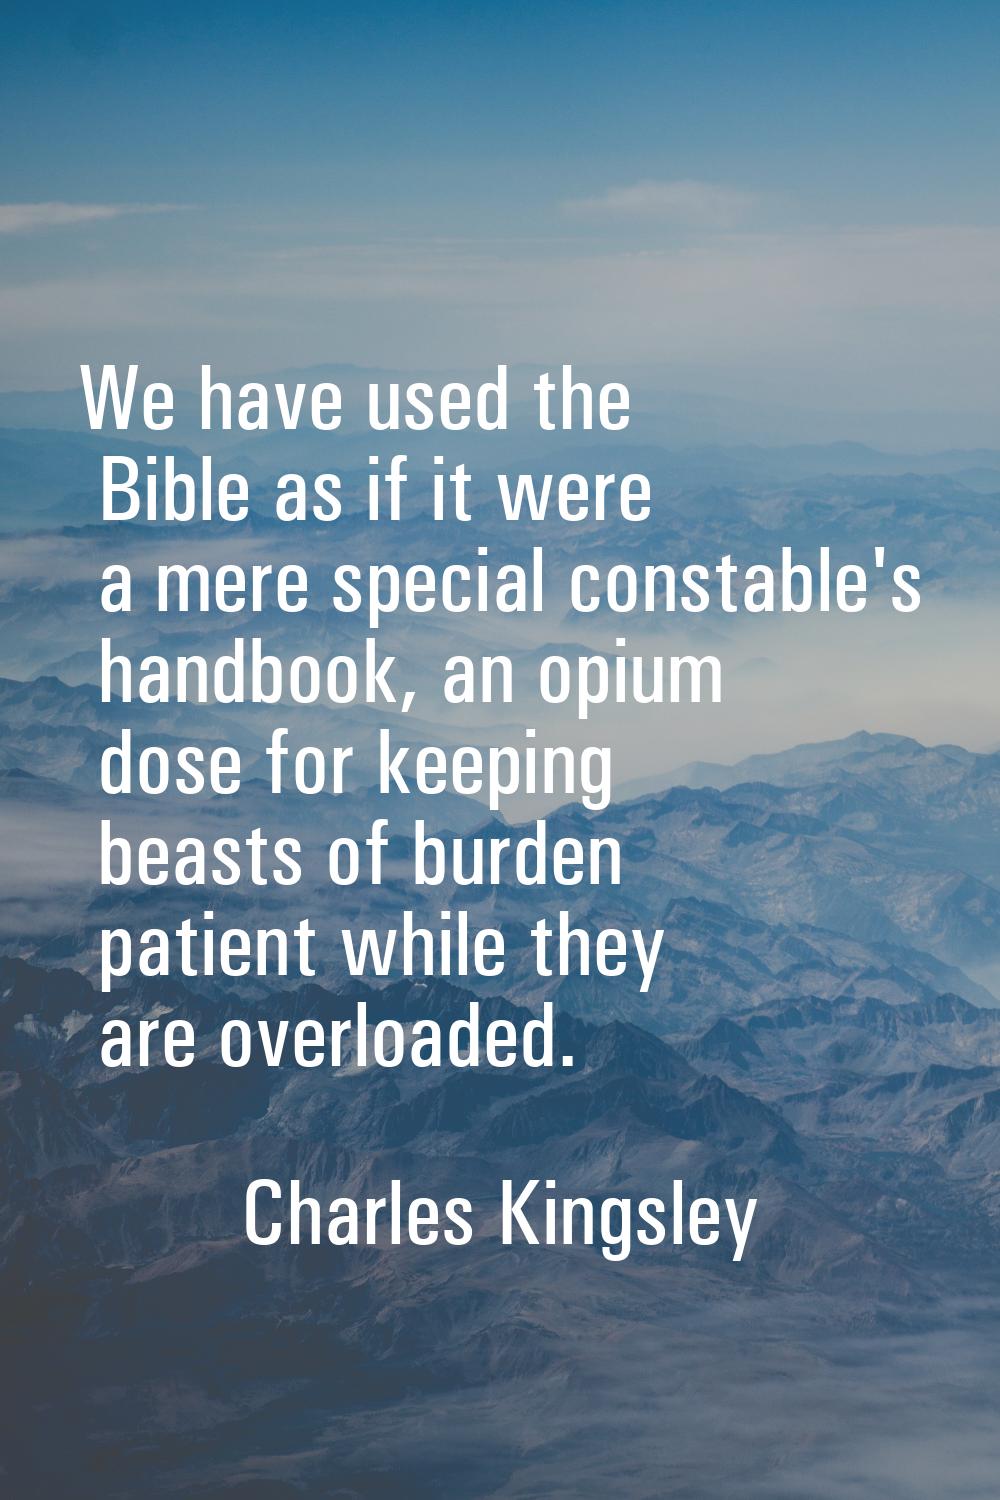 We have used the Bible as if it were a mere special constable's handbook, an opium dose for keeping